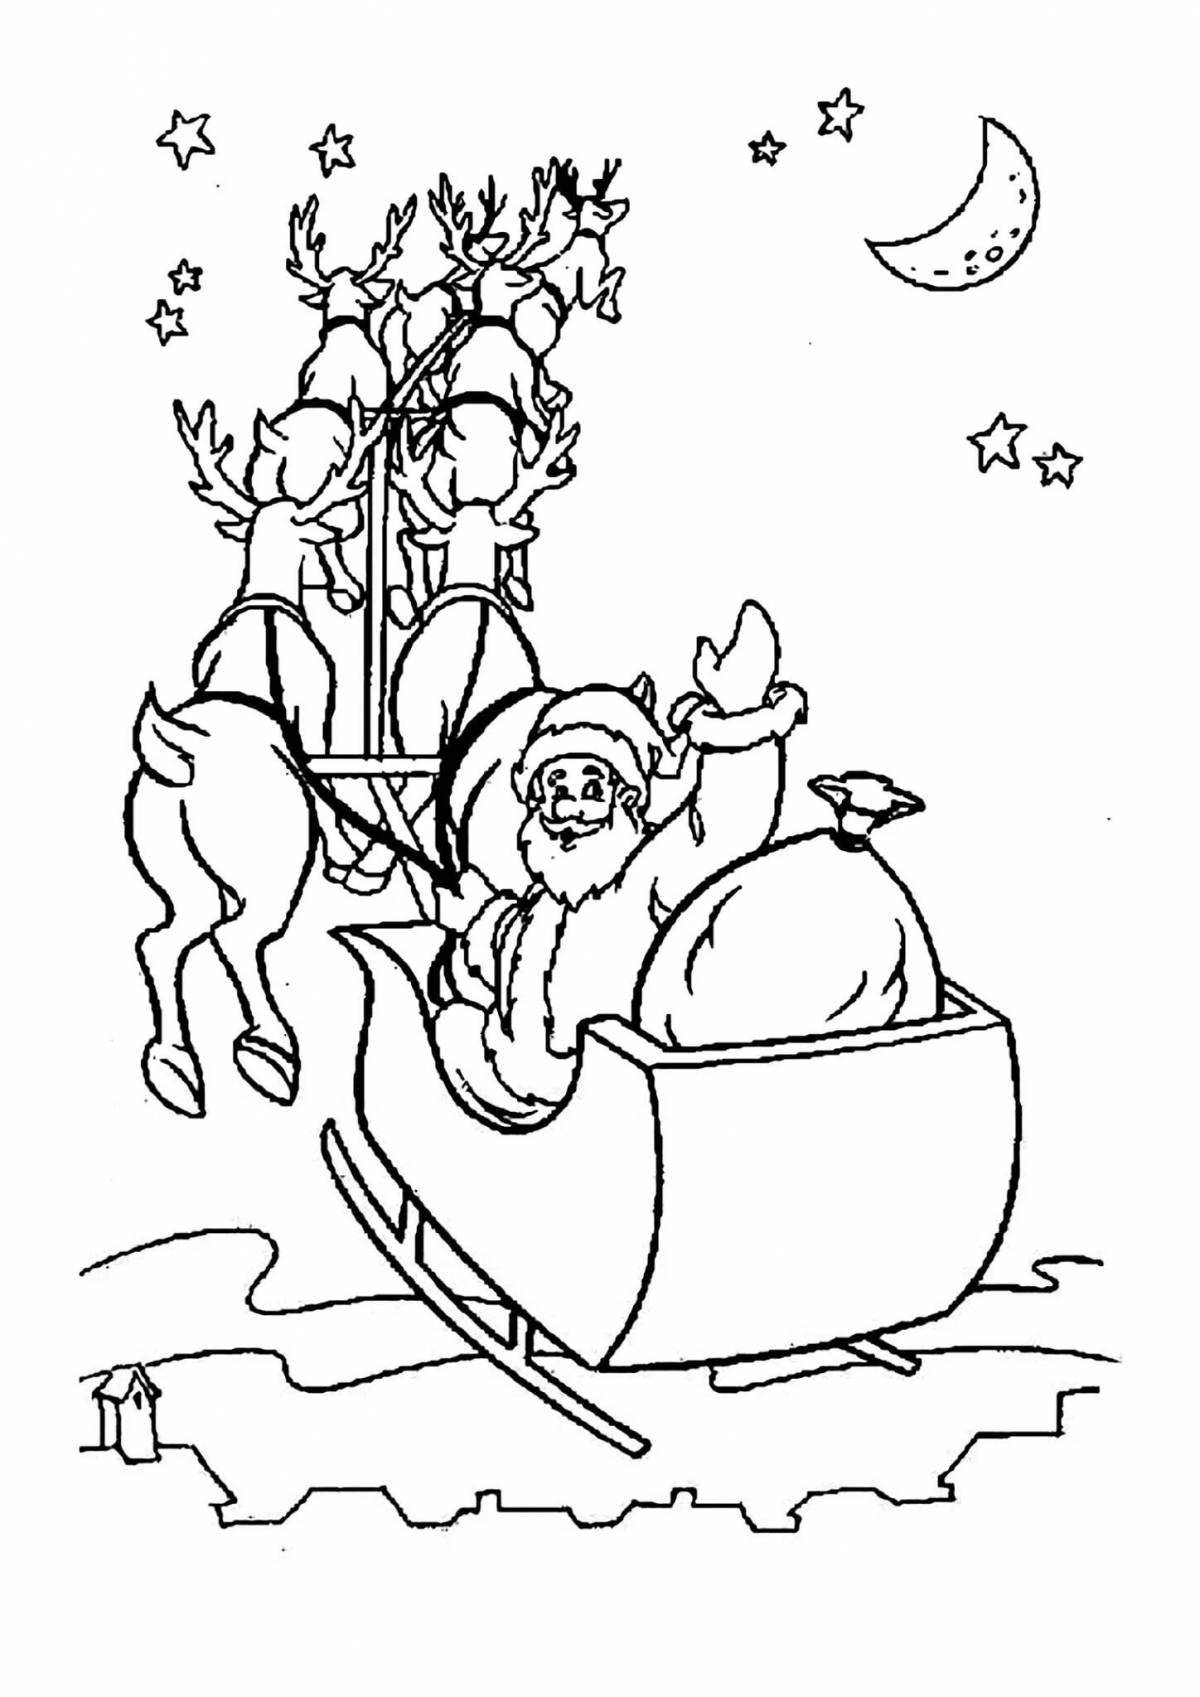 Coloring page impressive santa claus on sleigh